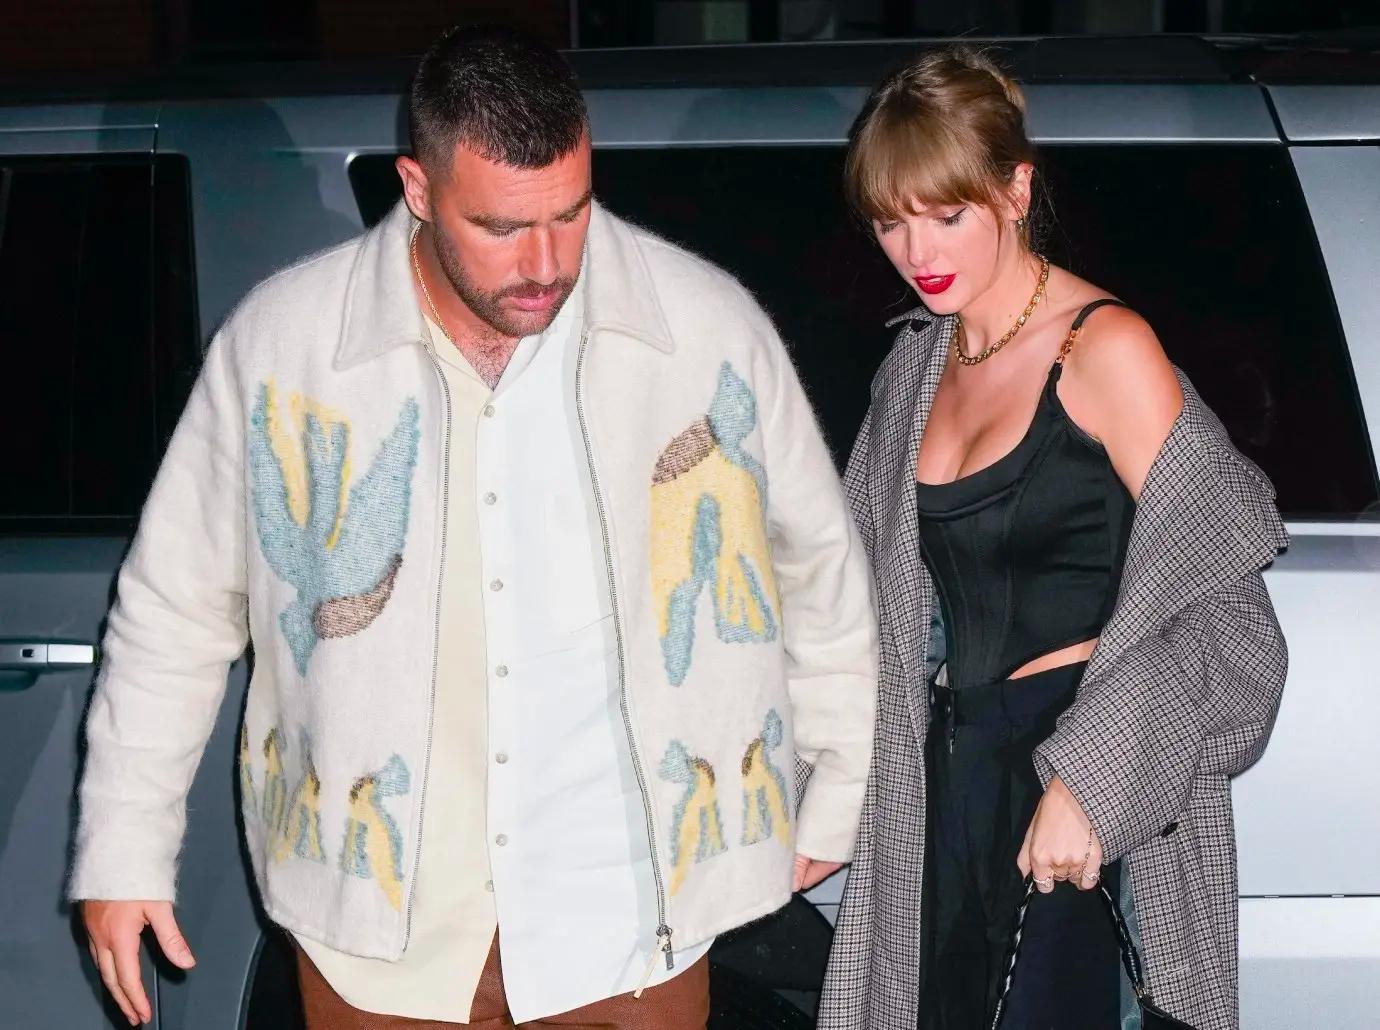 Taylor Swift dresses in a bear suit for NYE and more star snaps